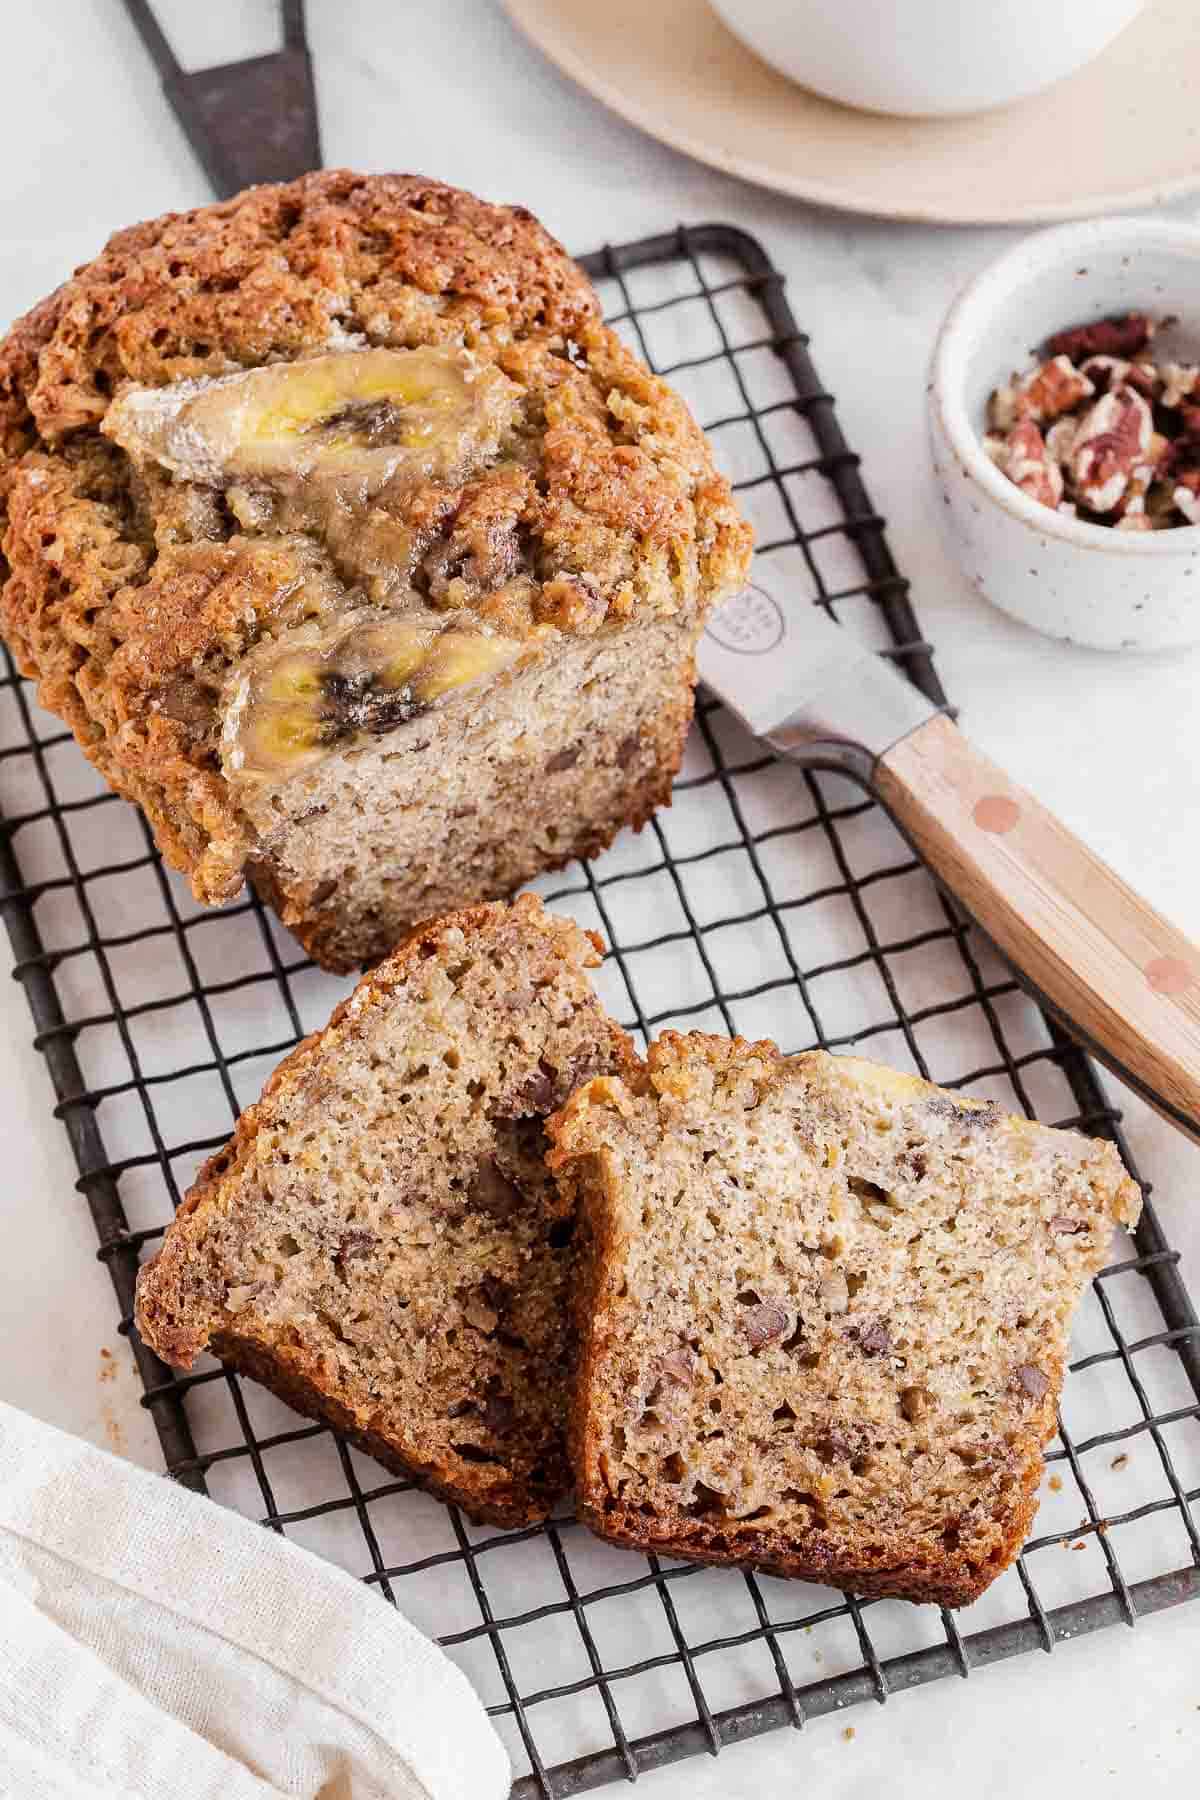 How Long To Bake Mini Loaves Of Banana Bread - Bake for 25 minutes, or